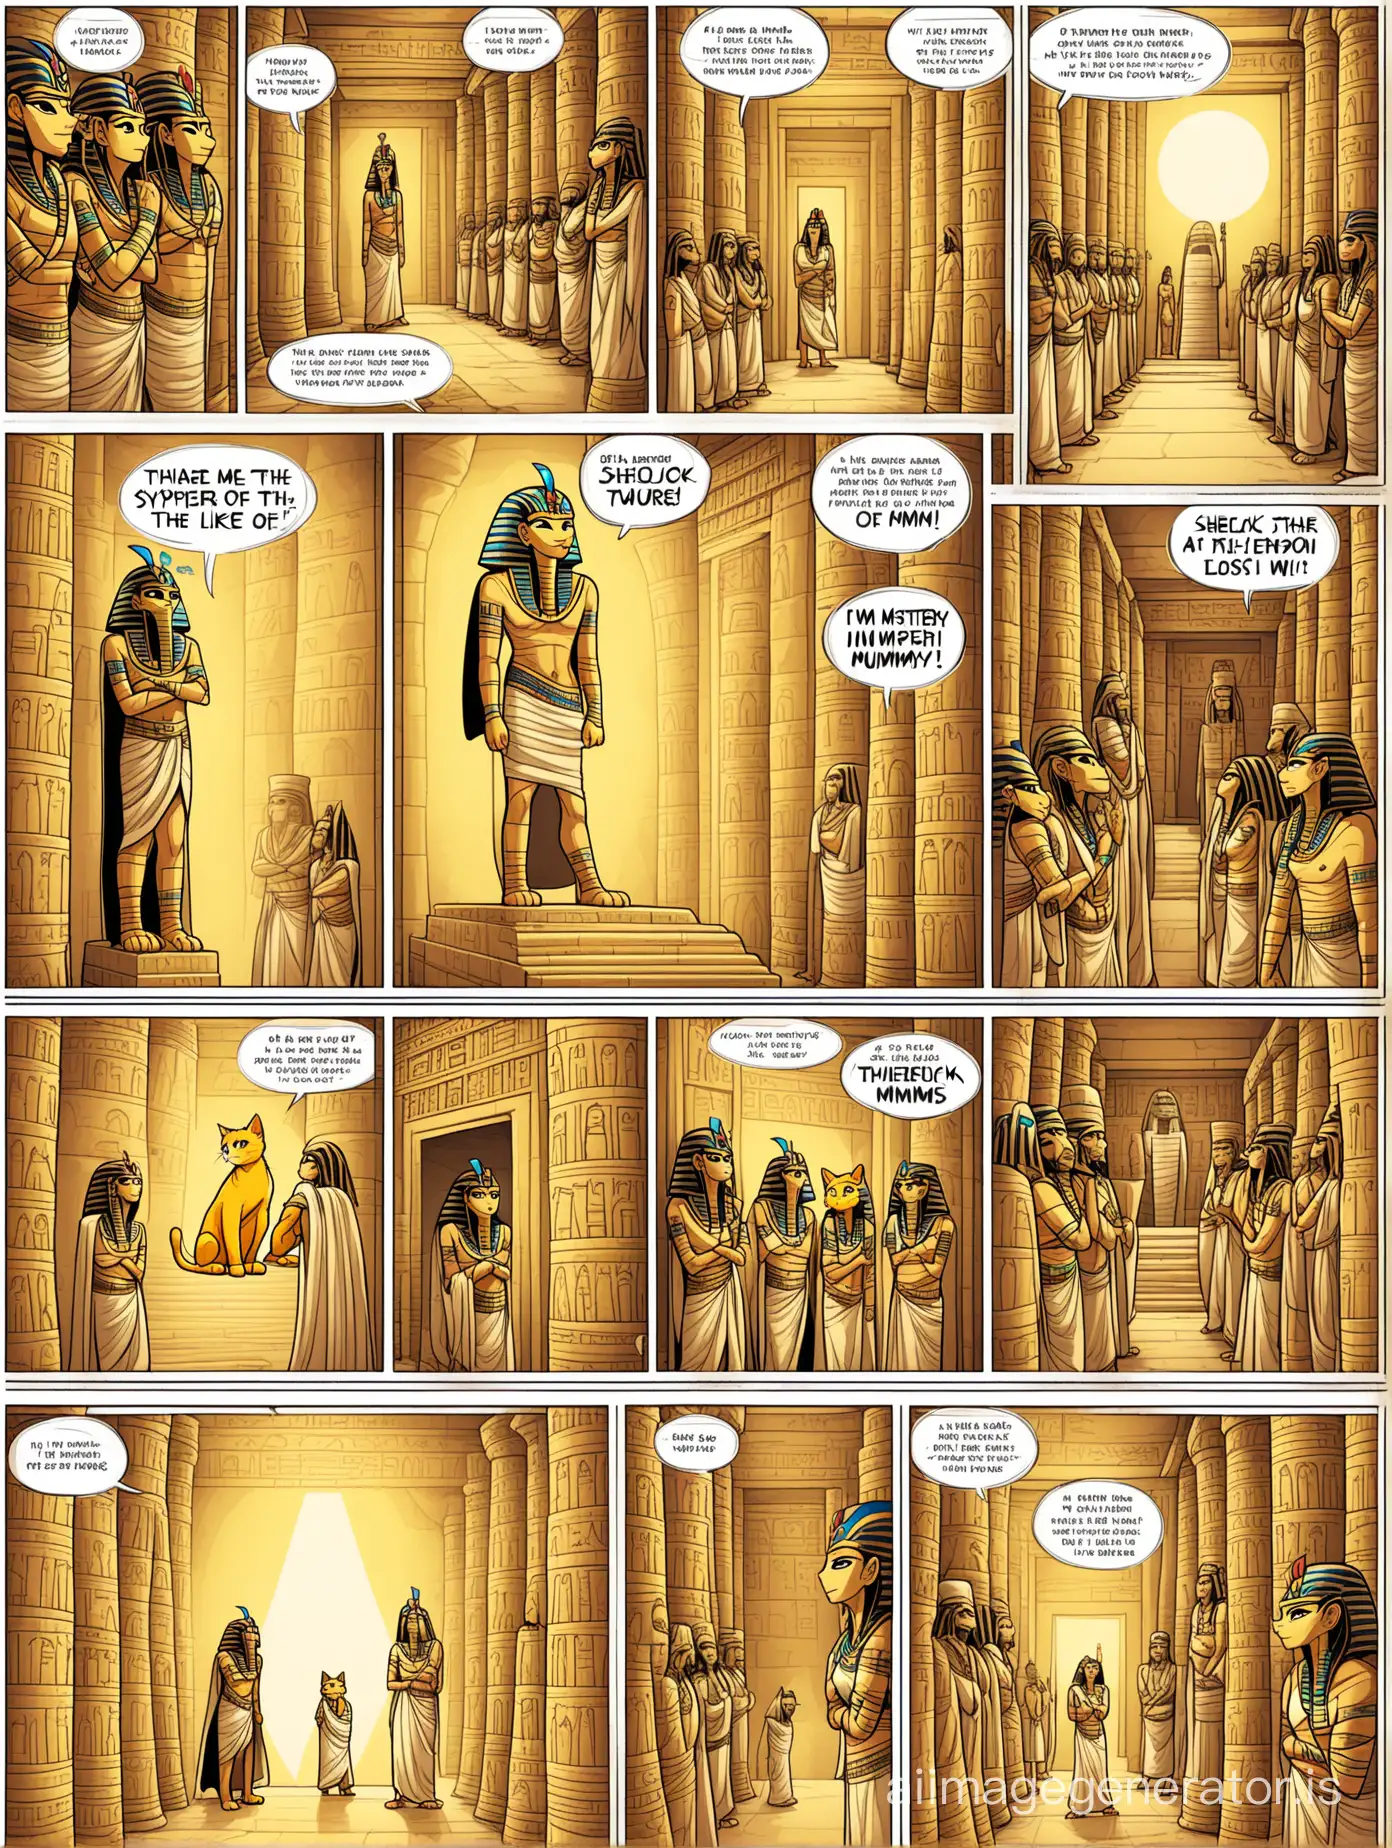 This comic is poorly colored. A yellow cat, like a person in a cloak with Sherlock Holmes' hat in an Egyptian temple. Around are Egyptian gods and mummies. The mystery of the lost mummy.